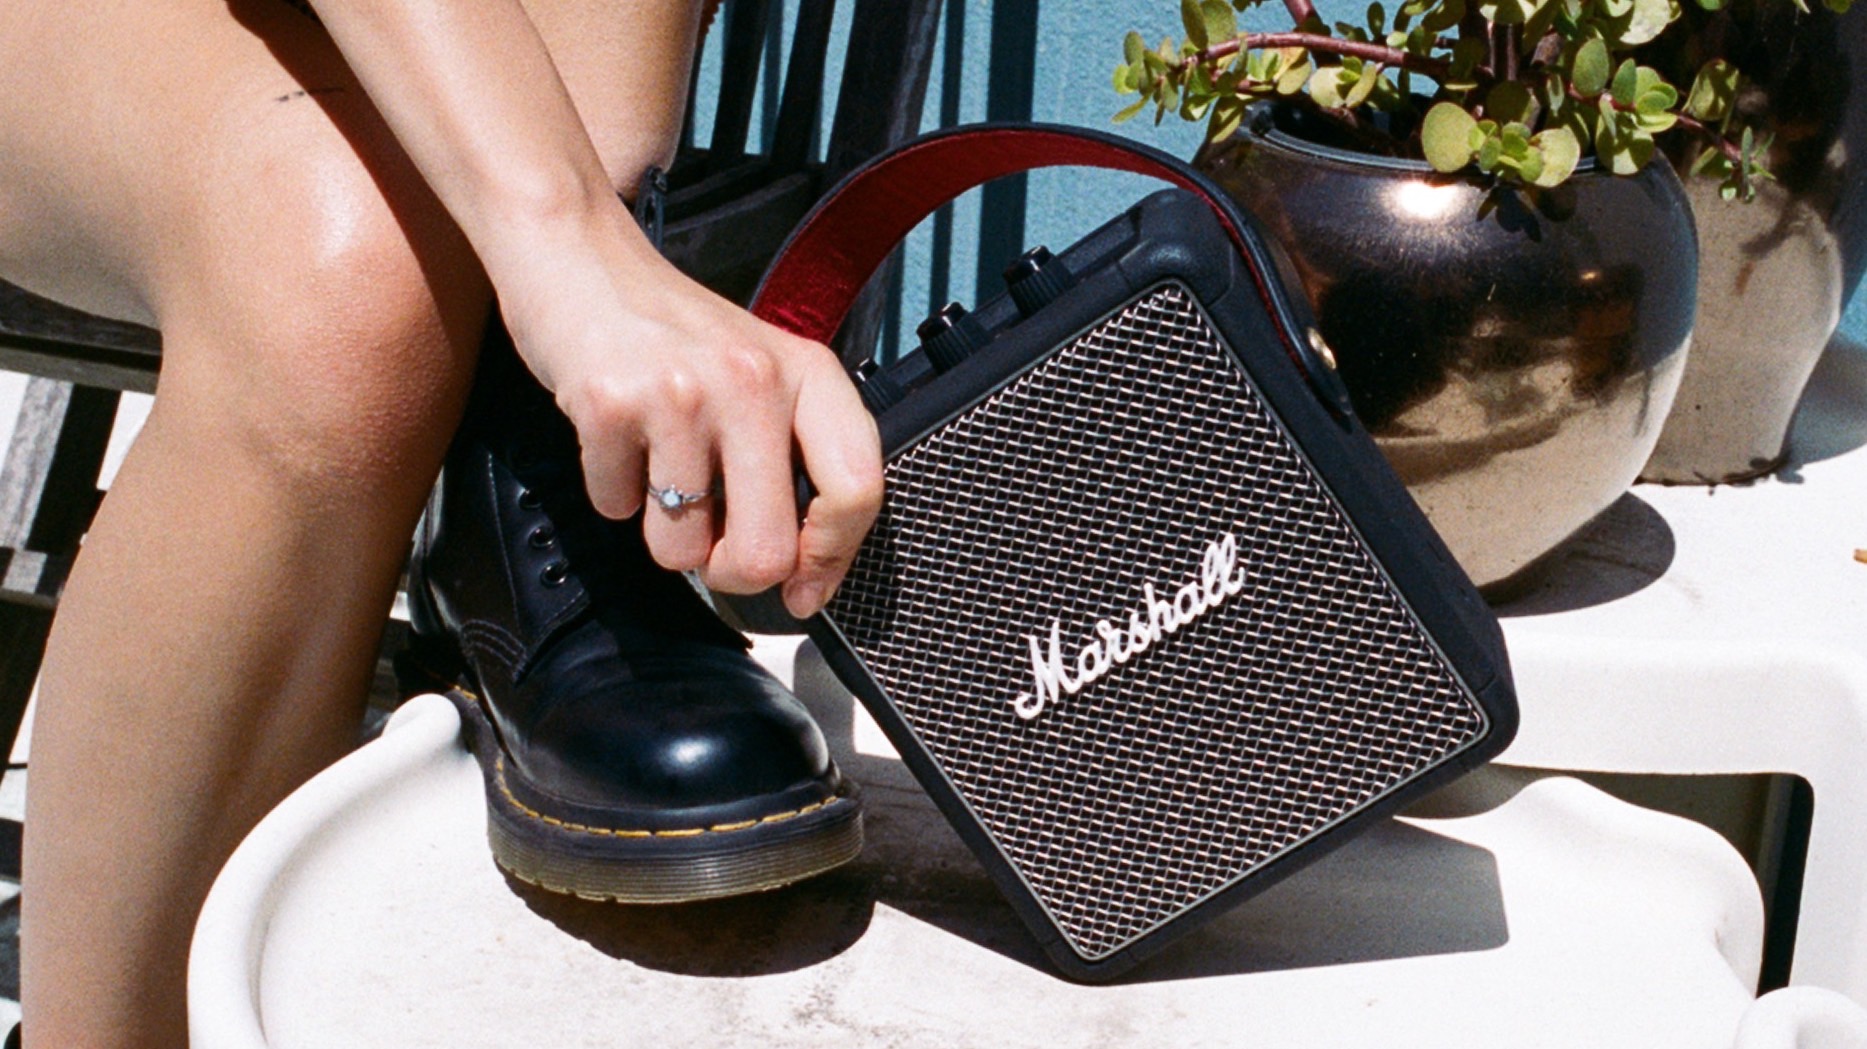 marshall portable speakers tufton stockwell ii vintage bluetooth campaign images hero selects 02 highres